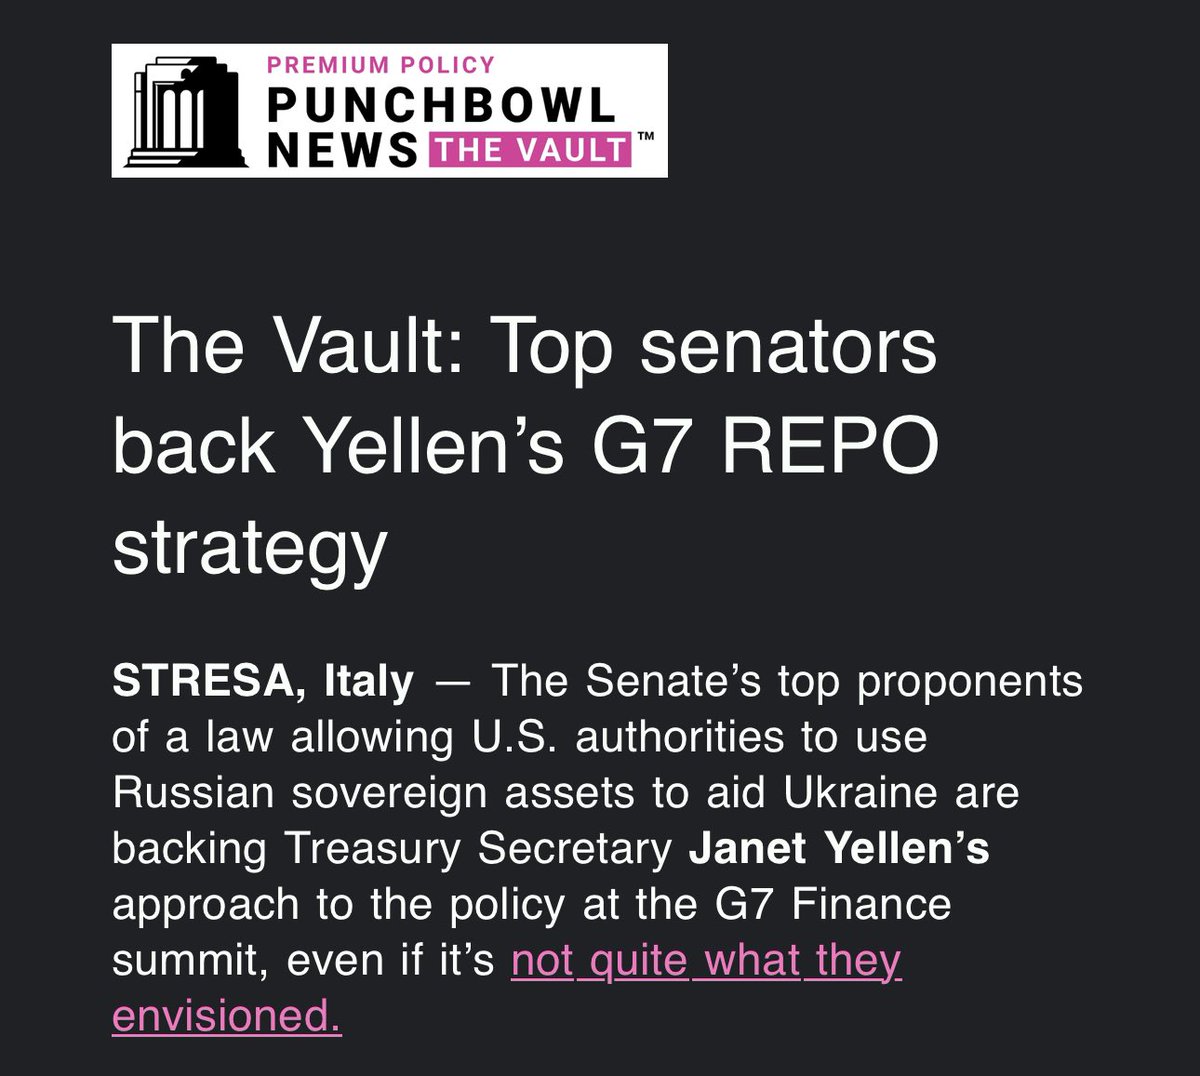 A transatlantic byline from @AndrewDesiderio and I in Punchbowl News AM: We talked to top foreign policy senators about Yellen's REPO Act strategy at the G7. For now, they're supportive. link.punchbowl.news/click/35458741…